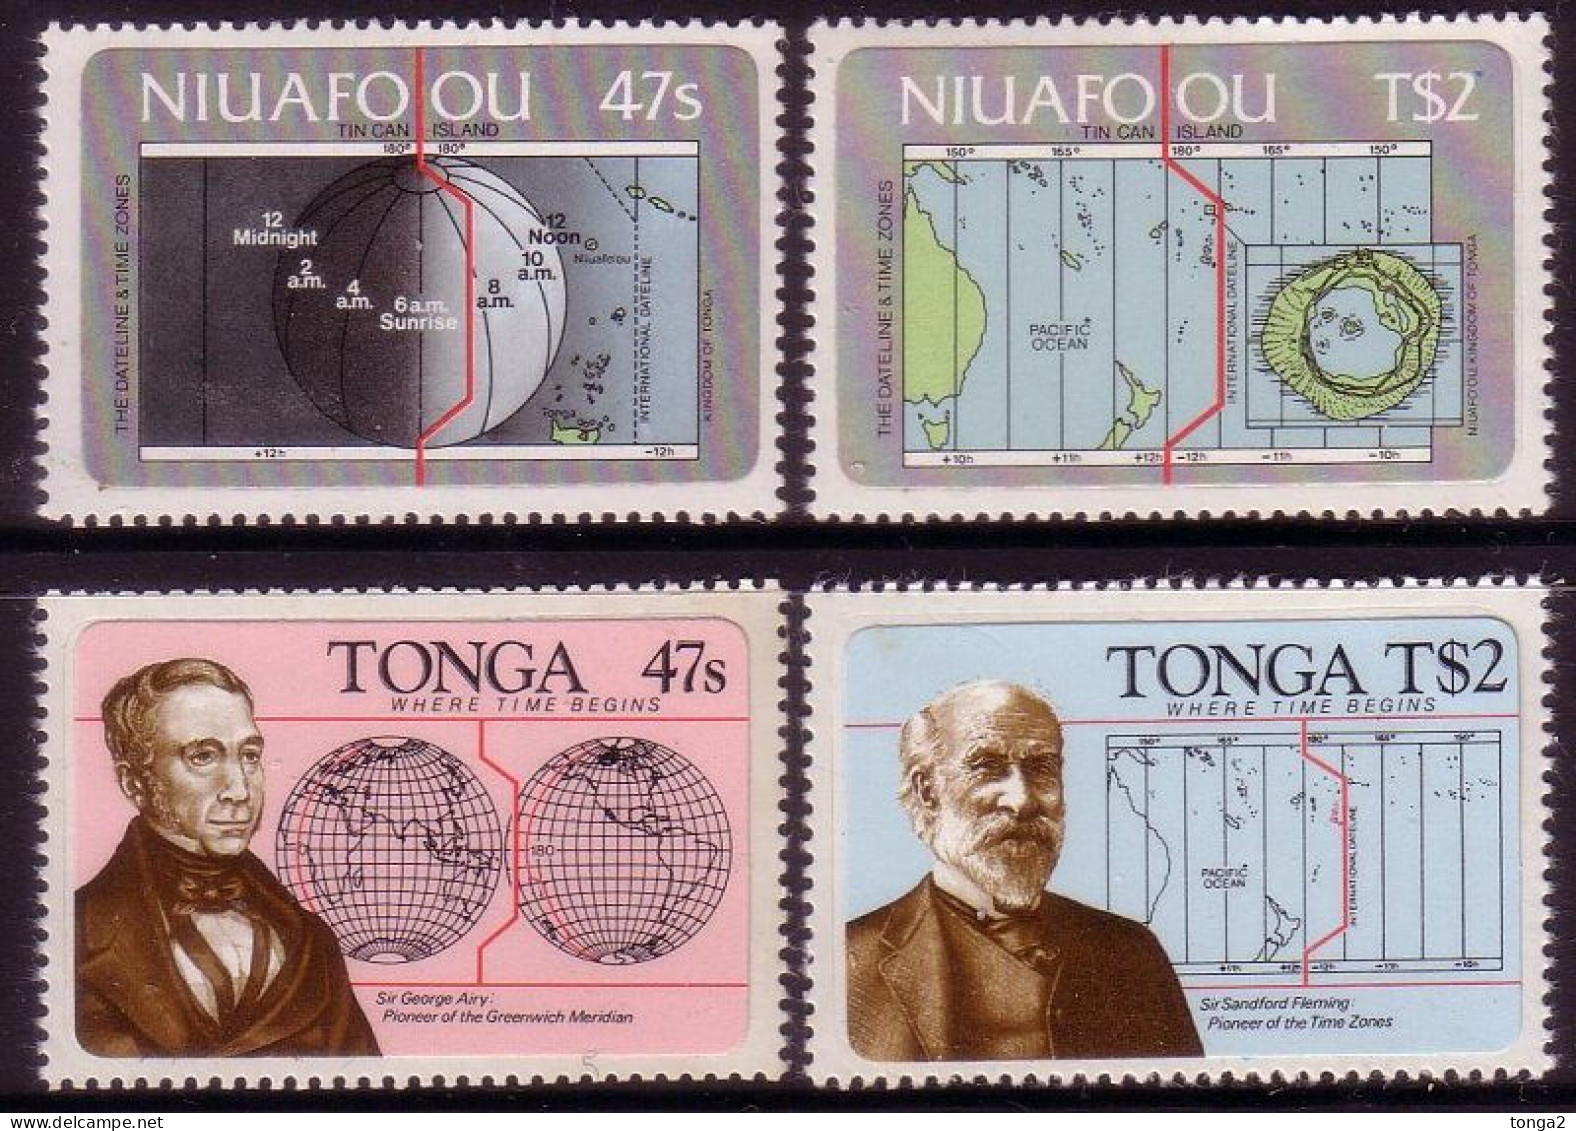 Tonga And Niuafo'ou 1984 Sets - Map, International Dateline, Time Zones - Geografía